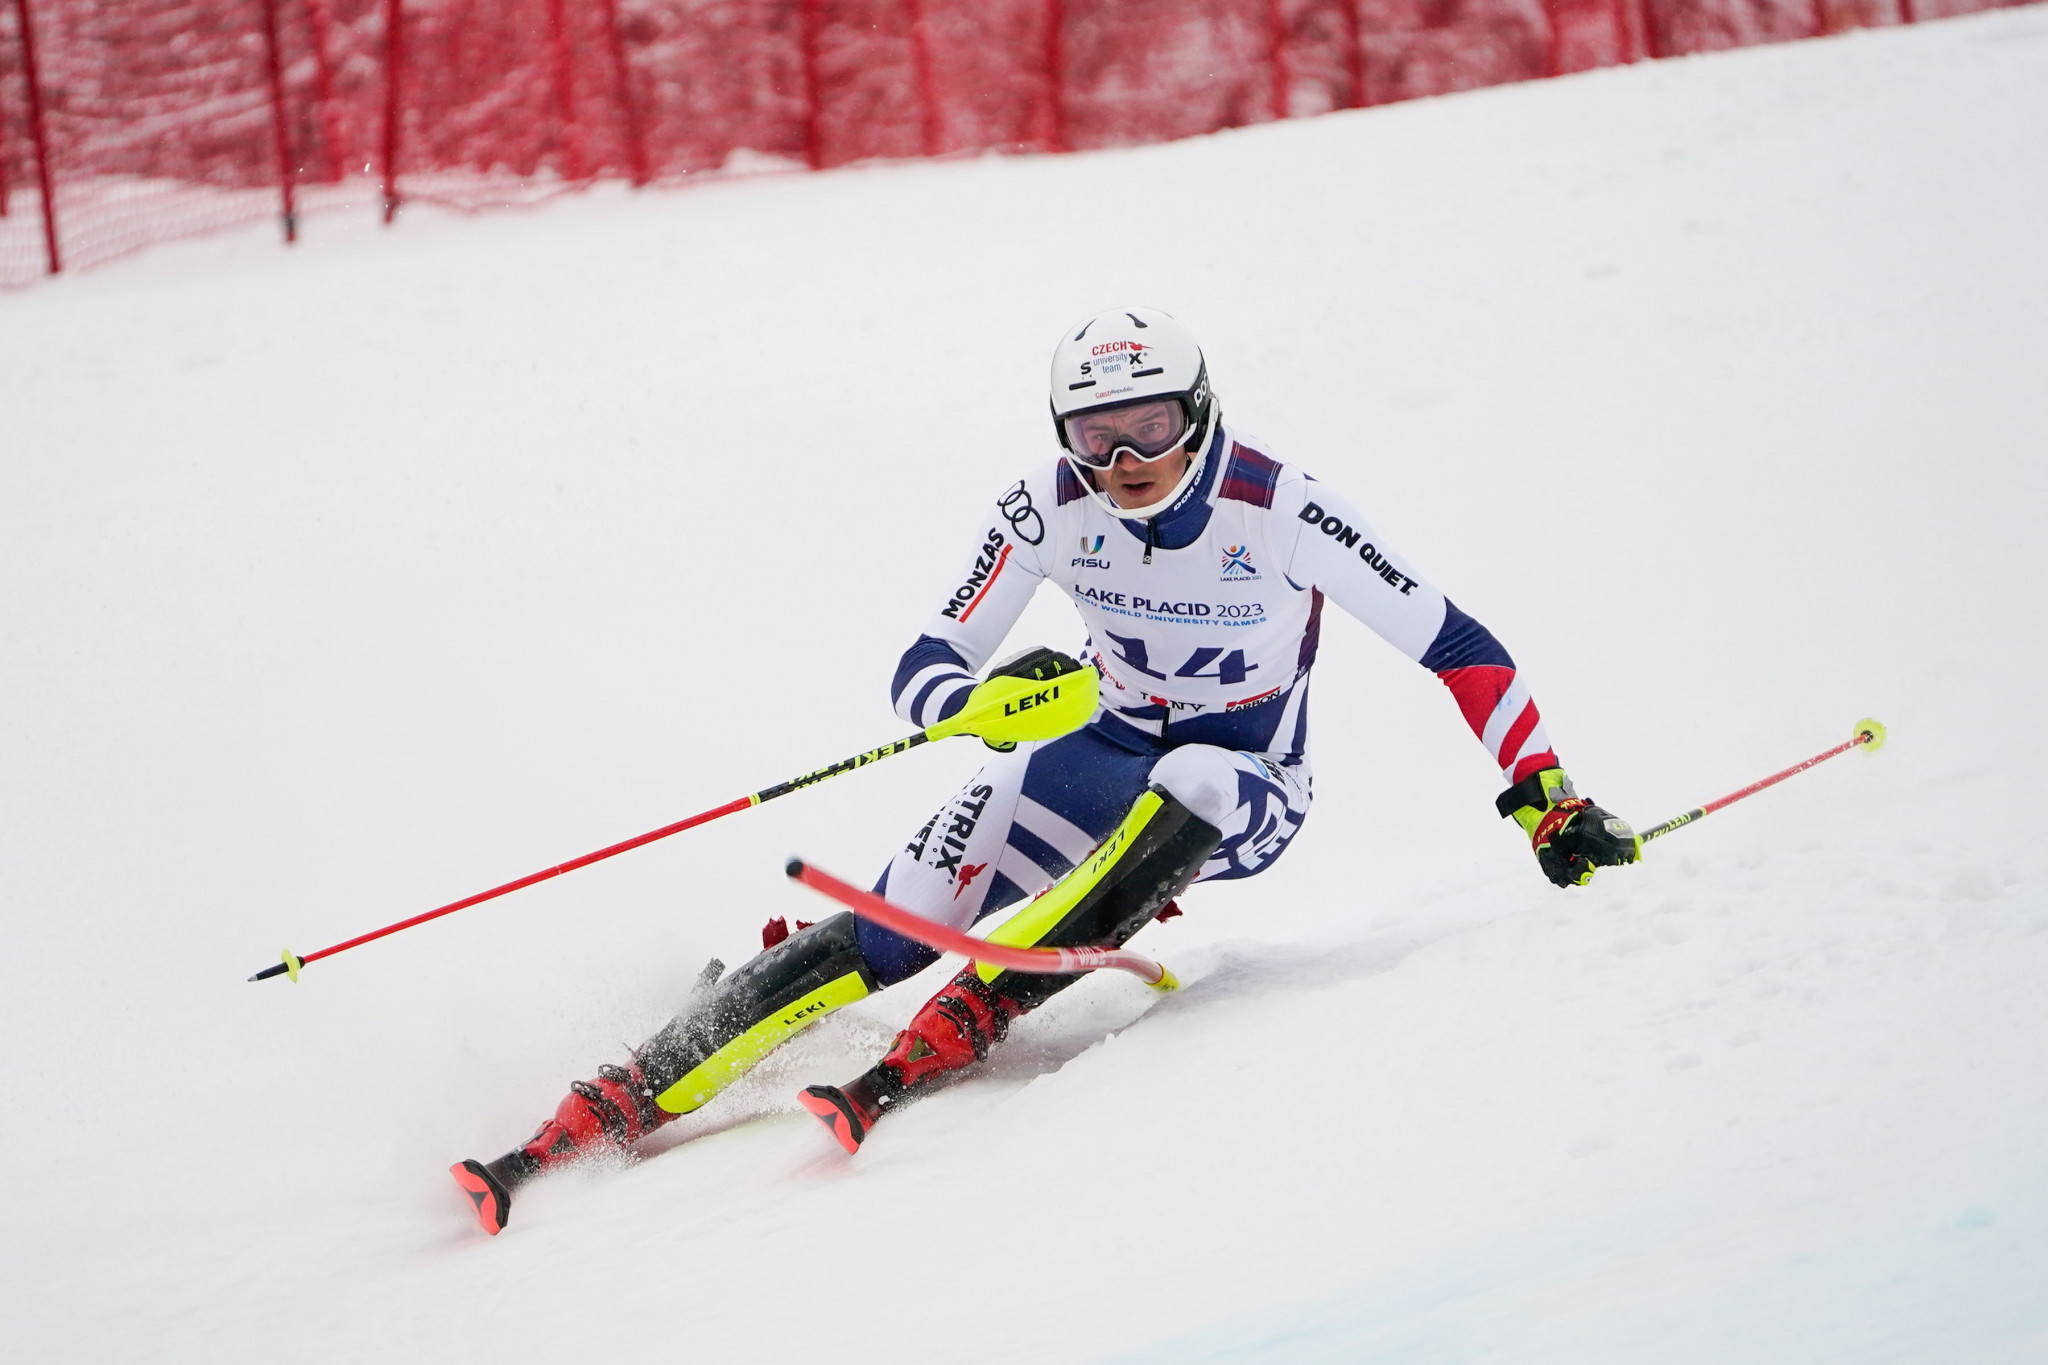 Jan Zabystran picked up his third gold medal of the Games in the men's Alpine skiing giant slalom ©FISU